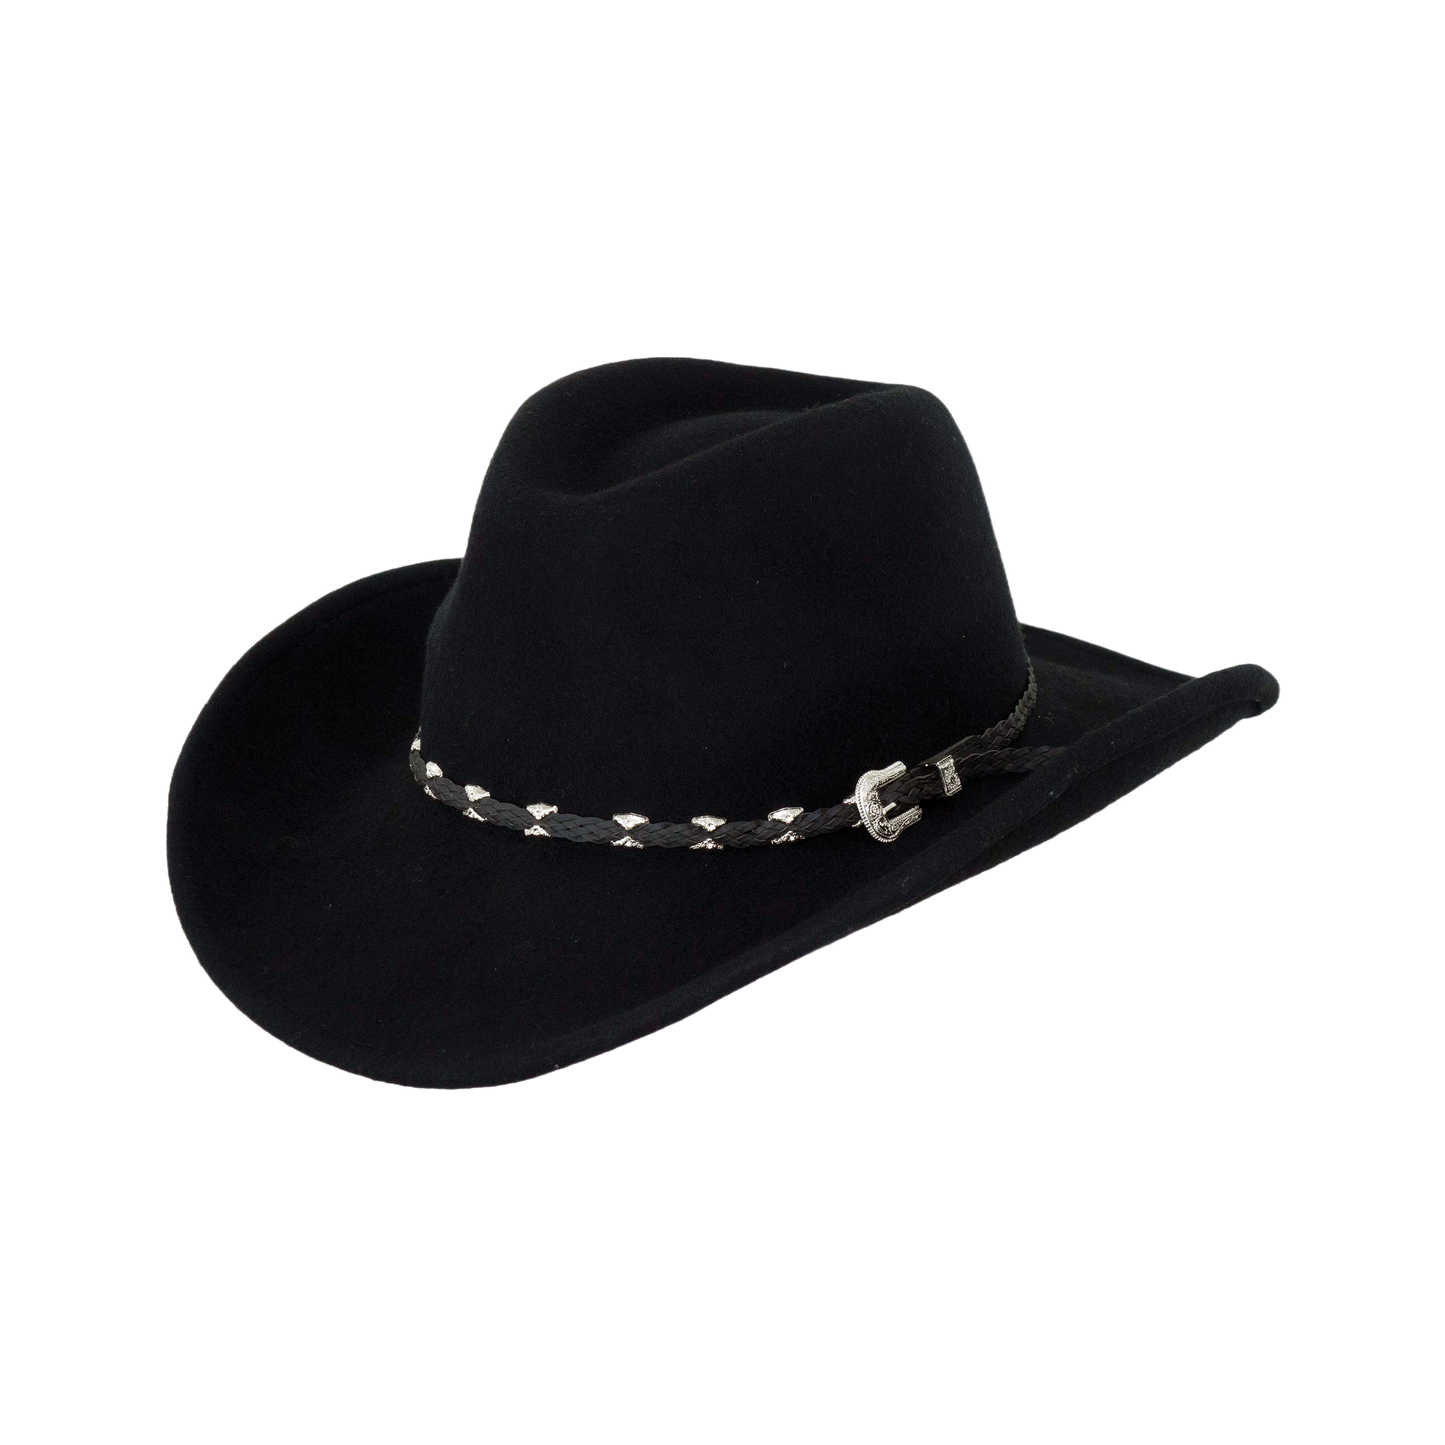 Outback Trading Company® Men's Wallaby Black Cowboy Hat 1320-BLK